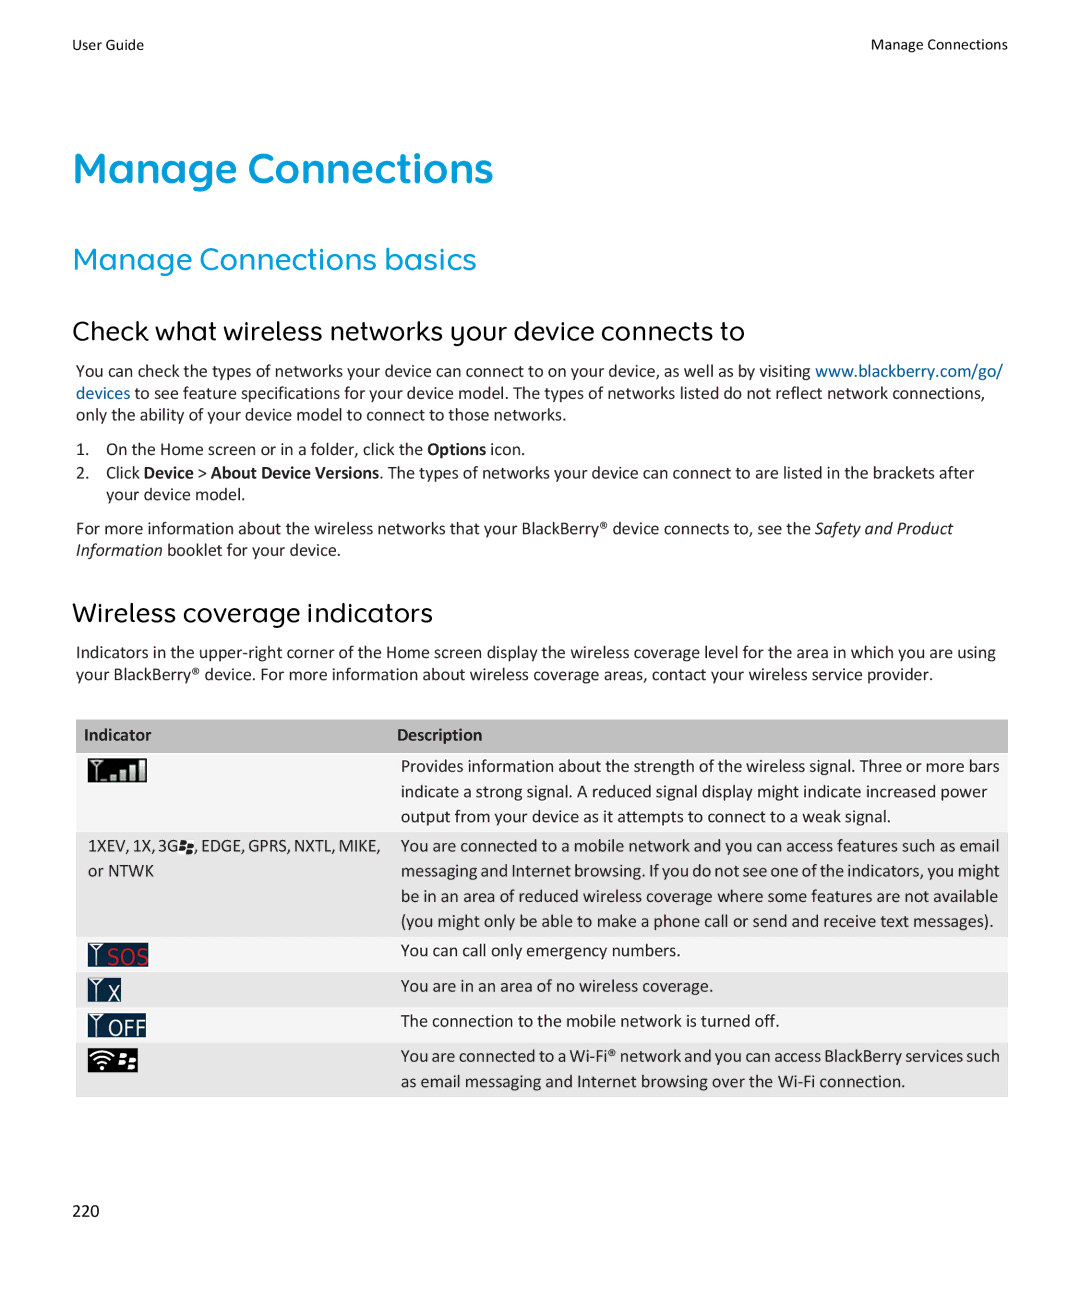 Blackberry SWDT643442-941426-0201084713-001 manual Manage Connections basics, Wireless coverage indicators 